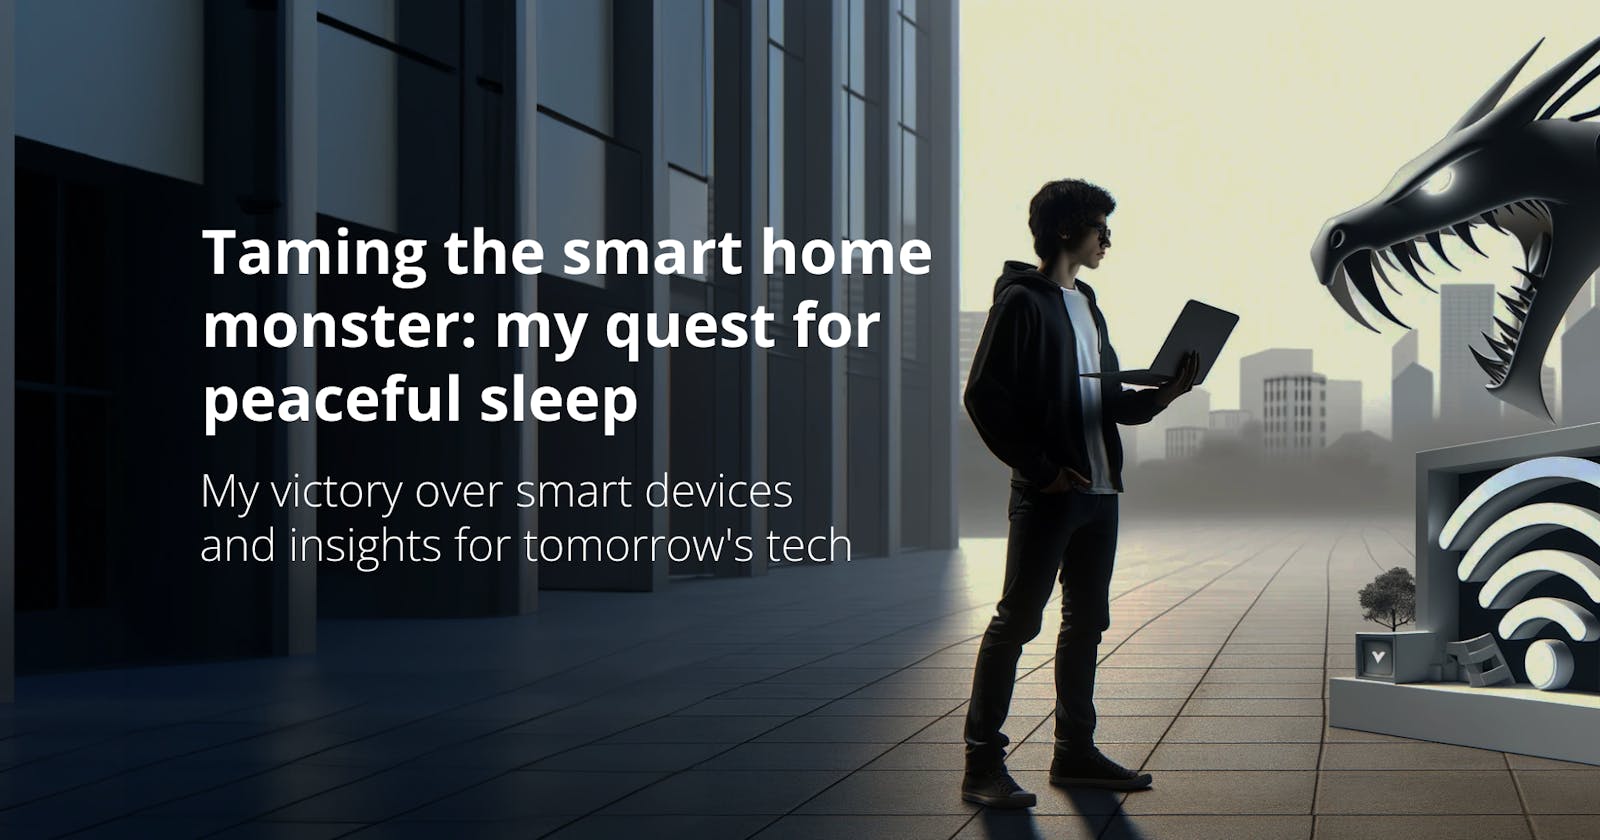 Taming the smart home monster: a quest for peaceful sleep